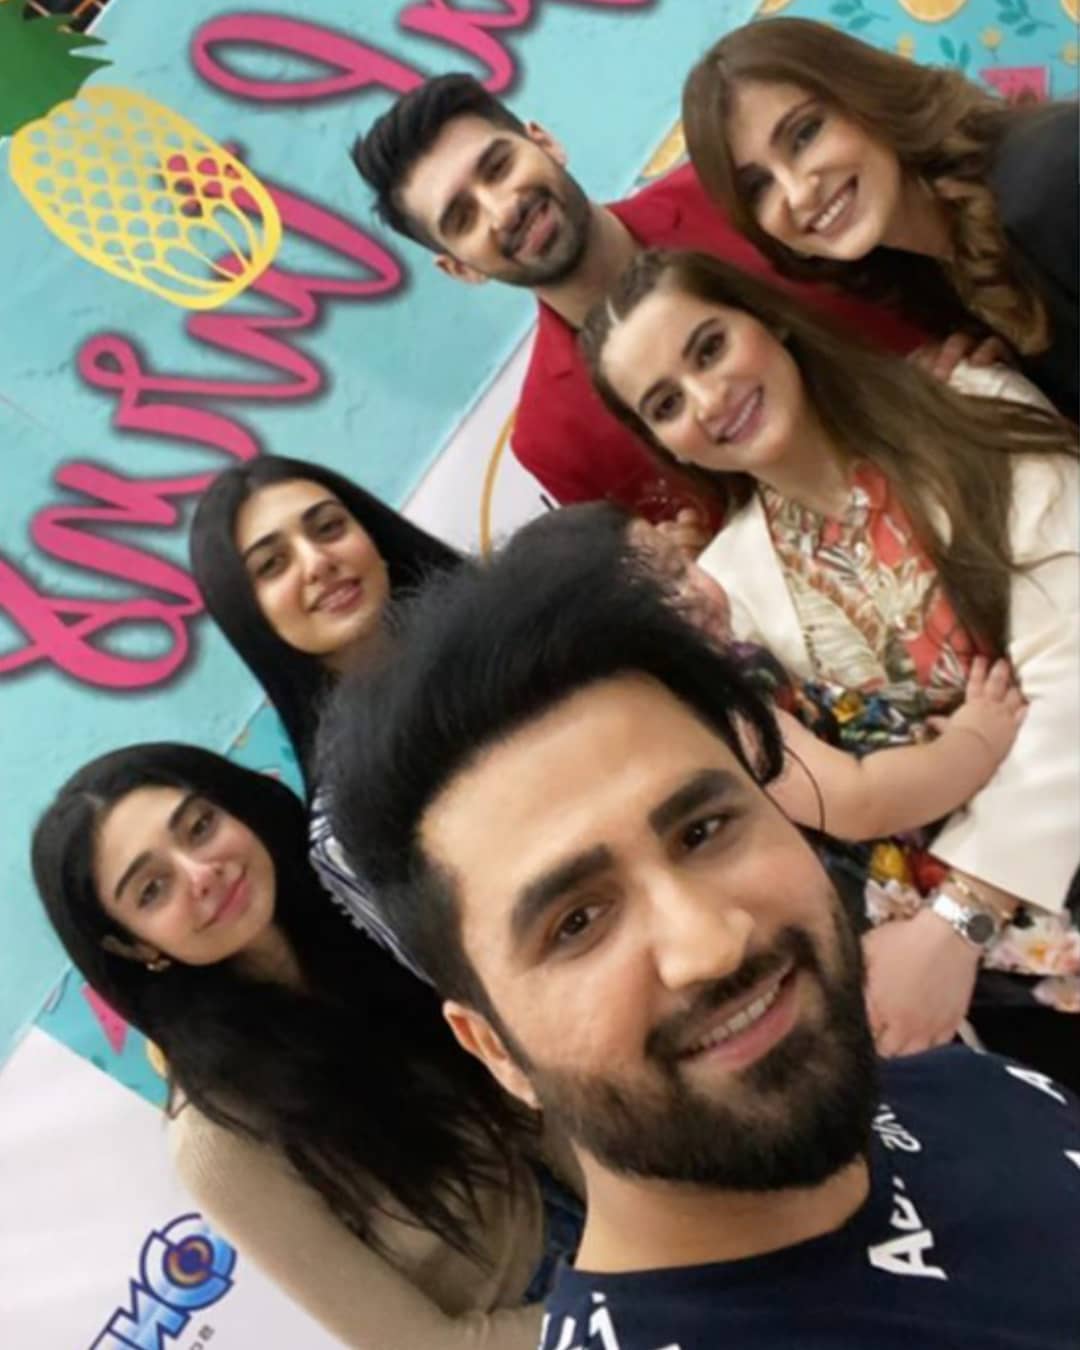 Newly Wed Couple Sarah Khan and Falak Shabir Spotted at Amal Muneeb Birthday Party